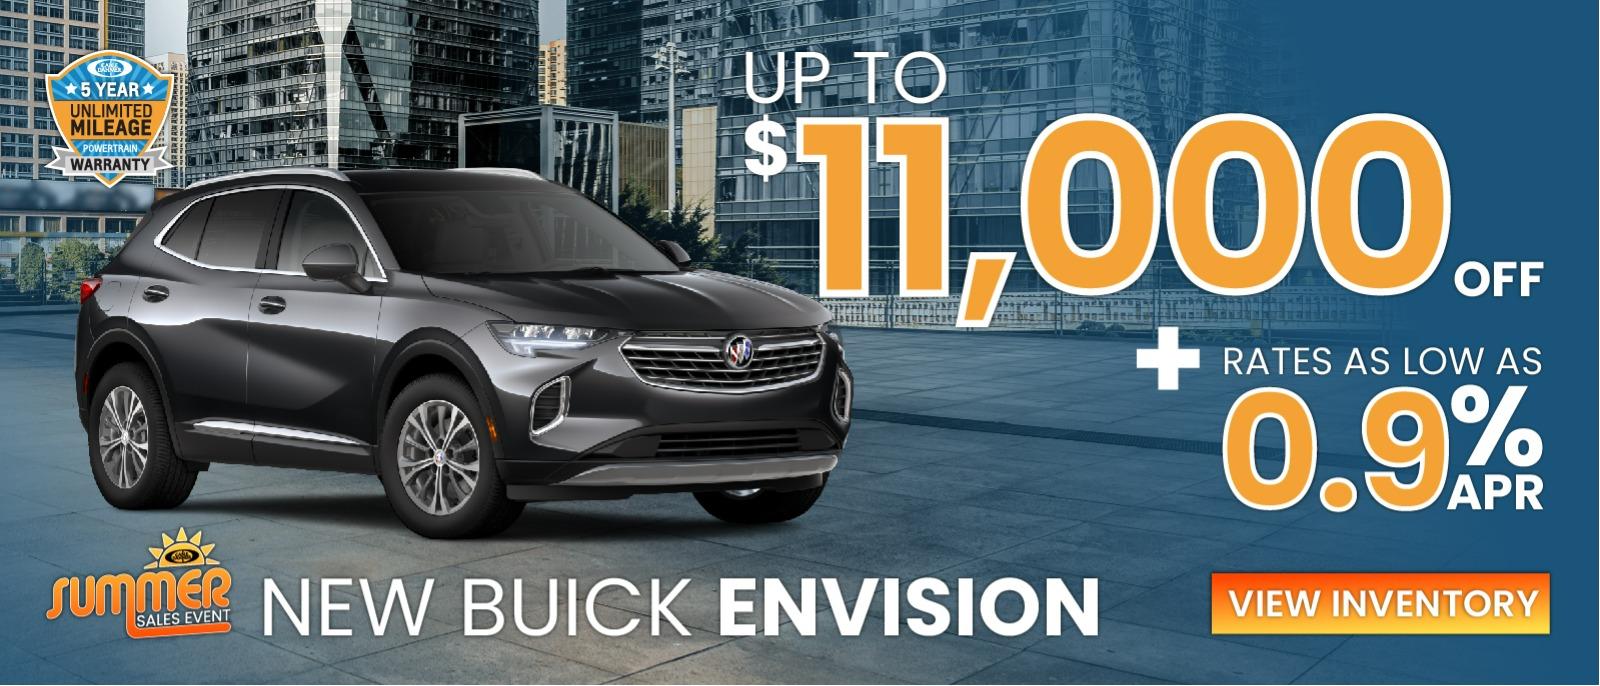 New Buick Envision for up to $!1,000 off